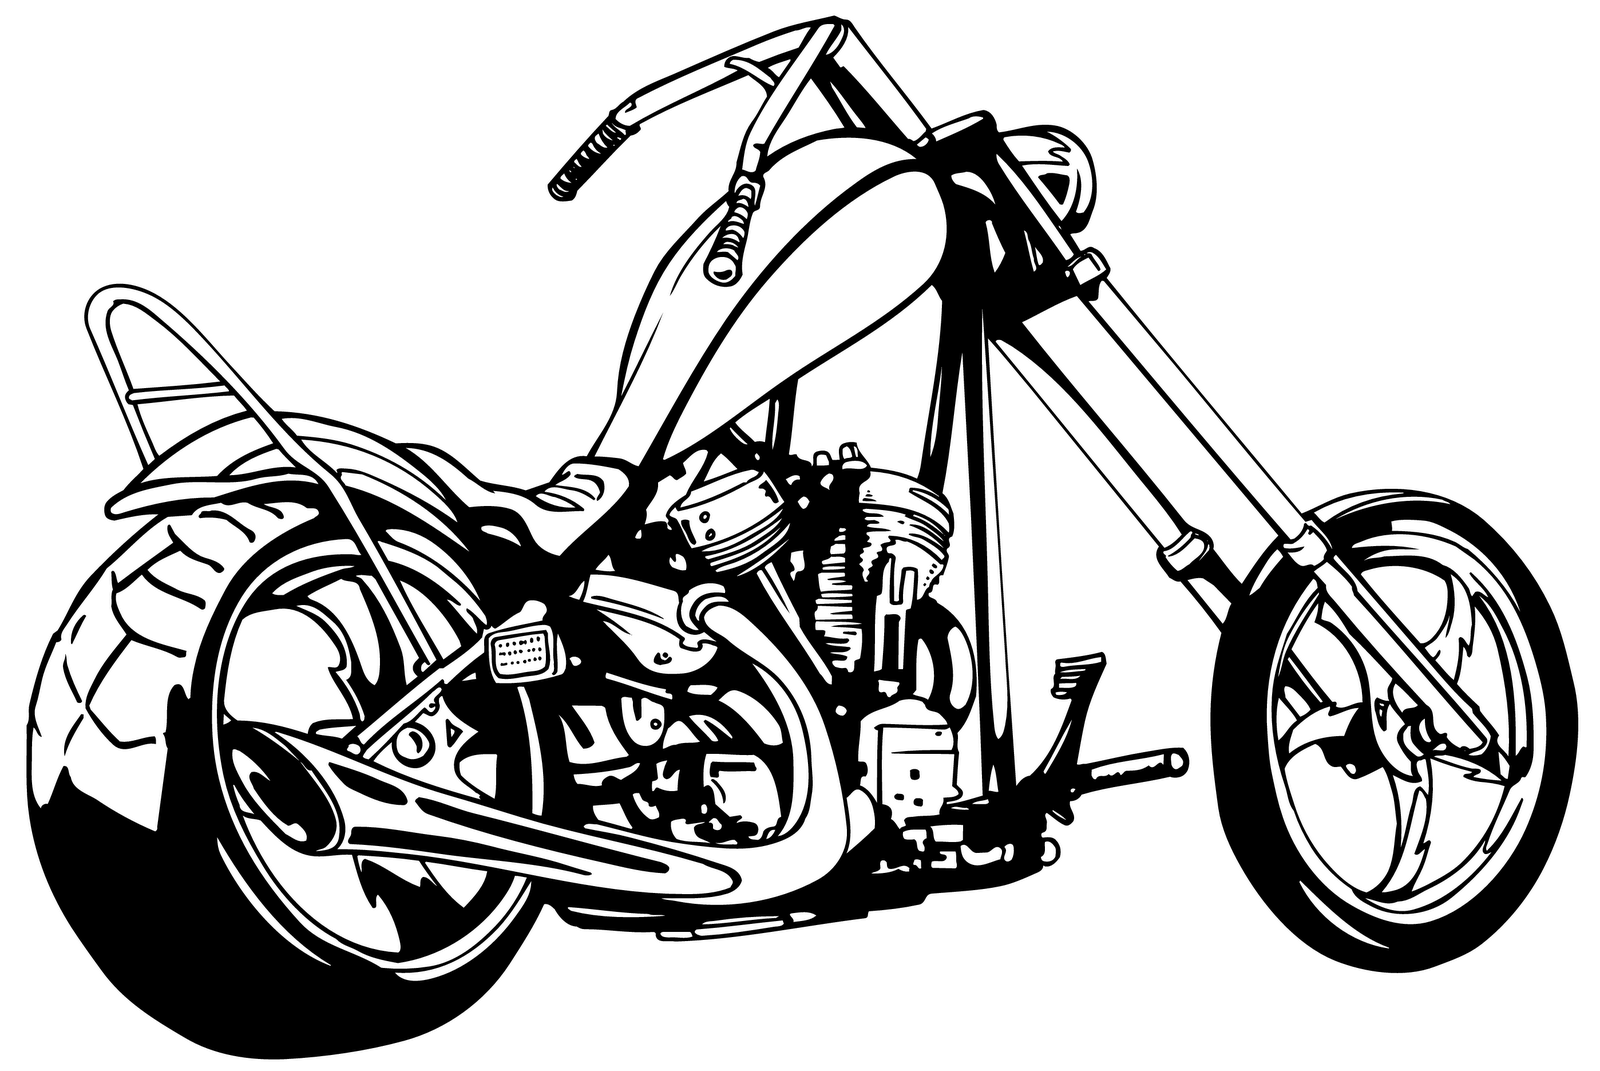 Motorcycle Silhouette Clip Art - Cliparts.co